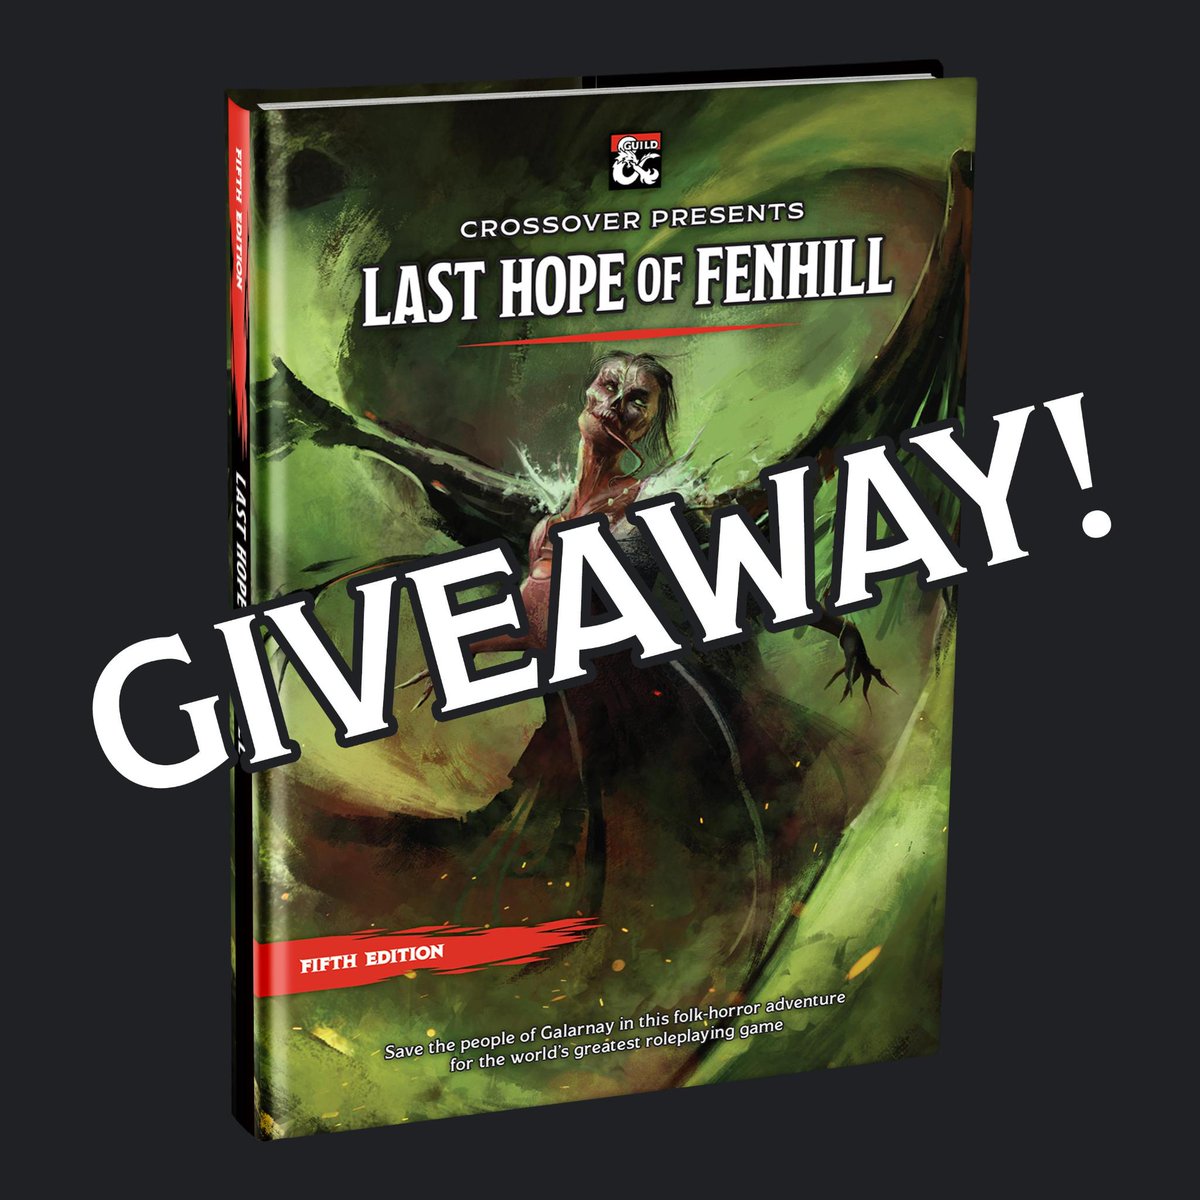 #GIVEAWAY Our D&D folk horror adventure releases May 1st on @DMs_guild. To celebrate we're giving away a free copy! How to enter: -> Share this post -> Visit wearecrossover.com/fenhill and & sign up We'll select a winner April 28th to receive a PDF on release. #TTRPG #dnd5e #dnd